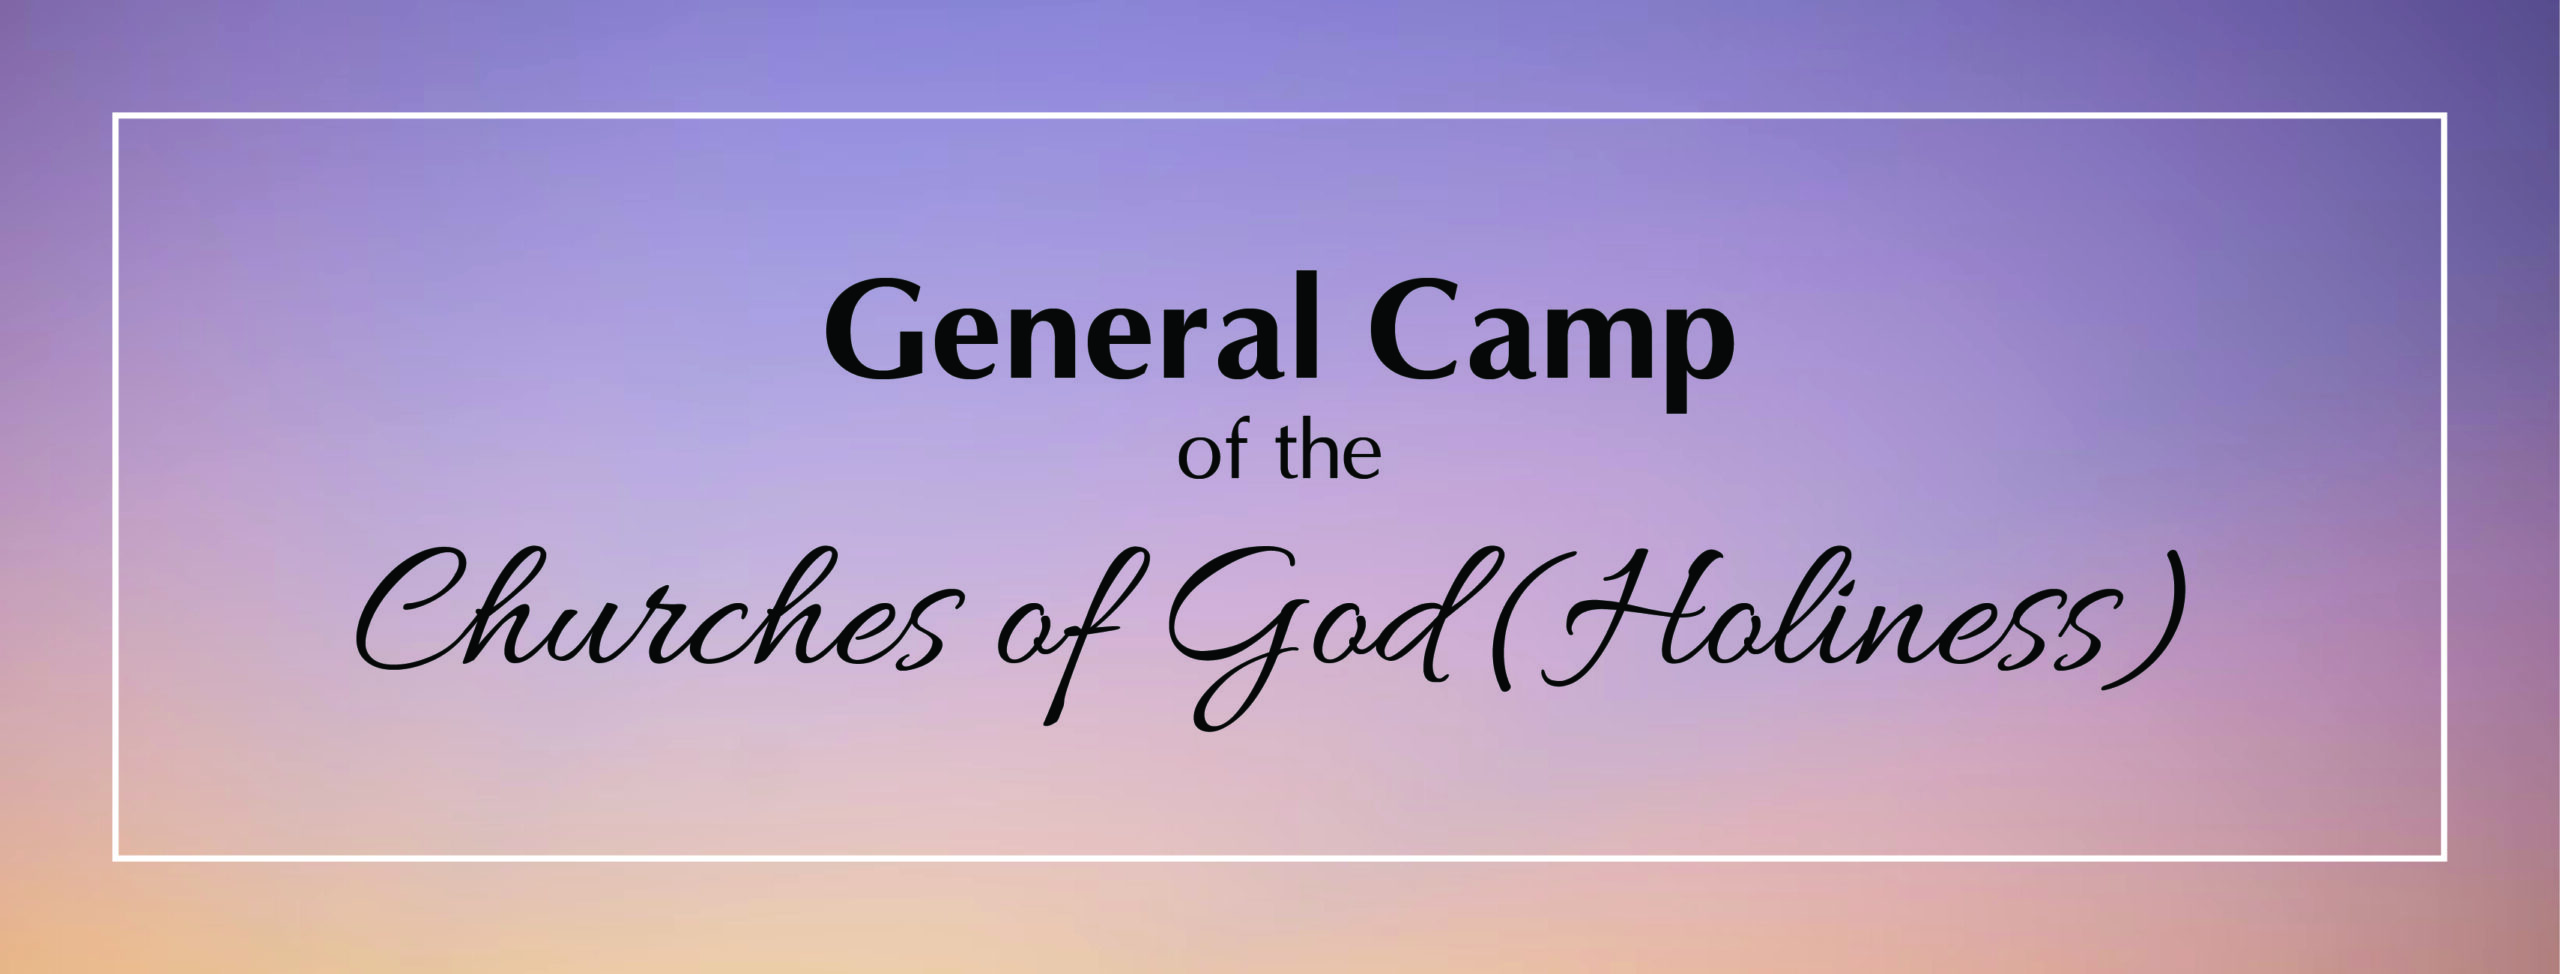 General Camp of the Churches of God (Holiness) Logo